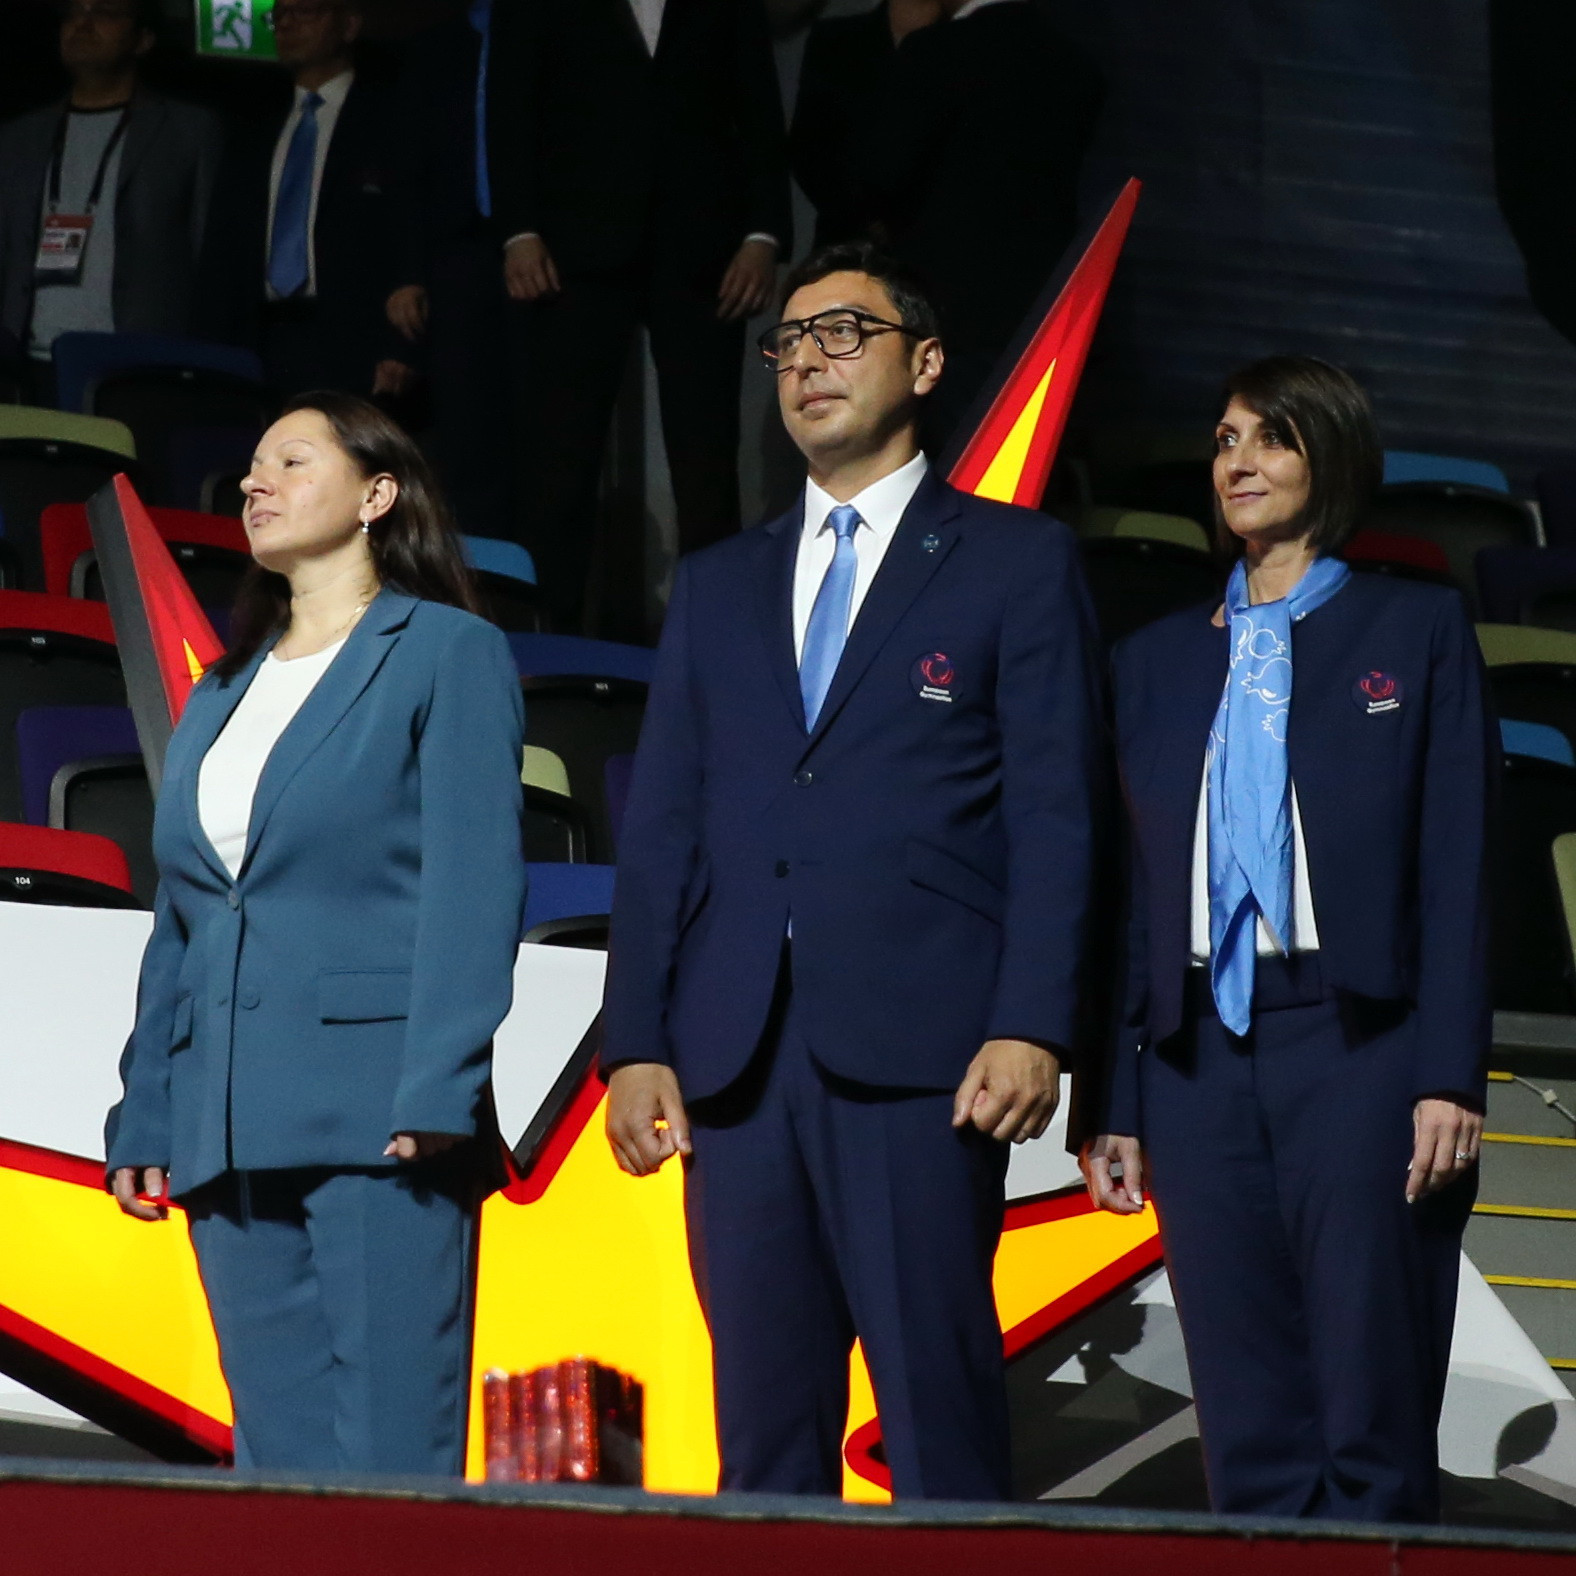 Azerbaijan Sports Minister and European Gymnastics President Farid Gayibov, centre, was present at the venue today ©AGF